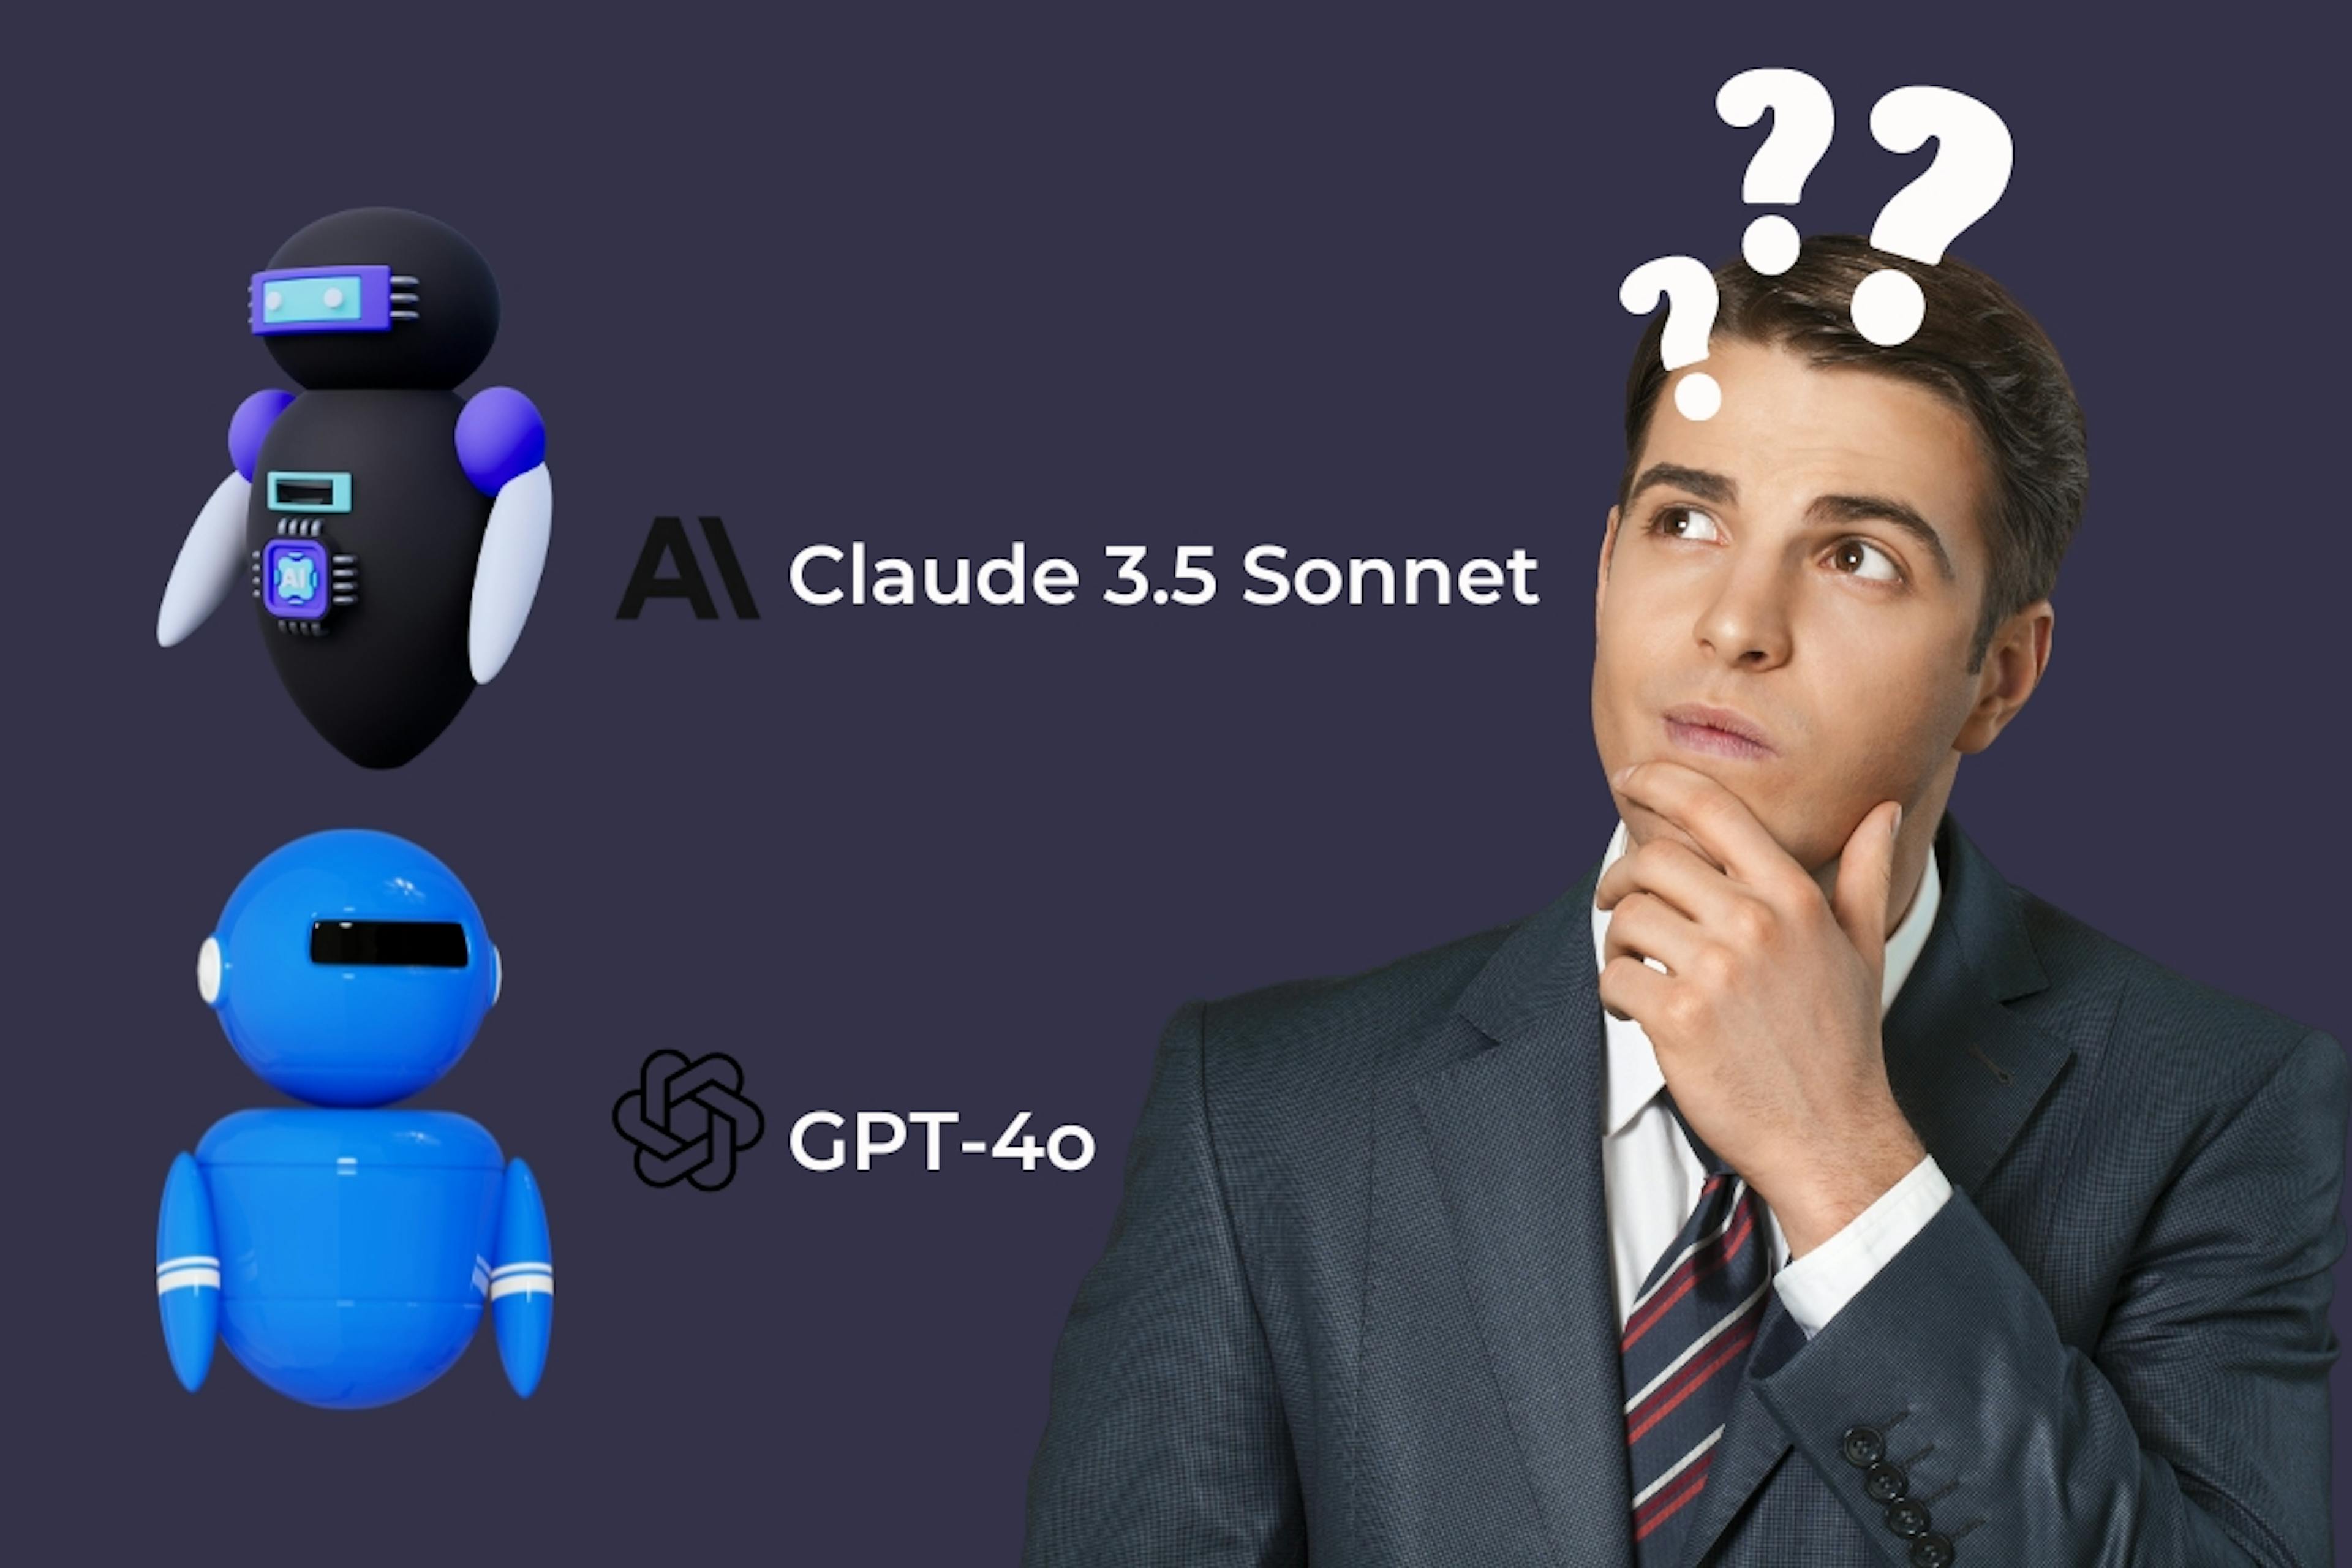 Gpt-4o and Claude 3.5 Sonnet